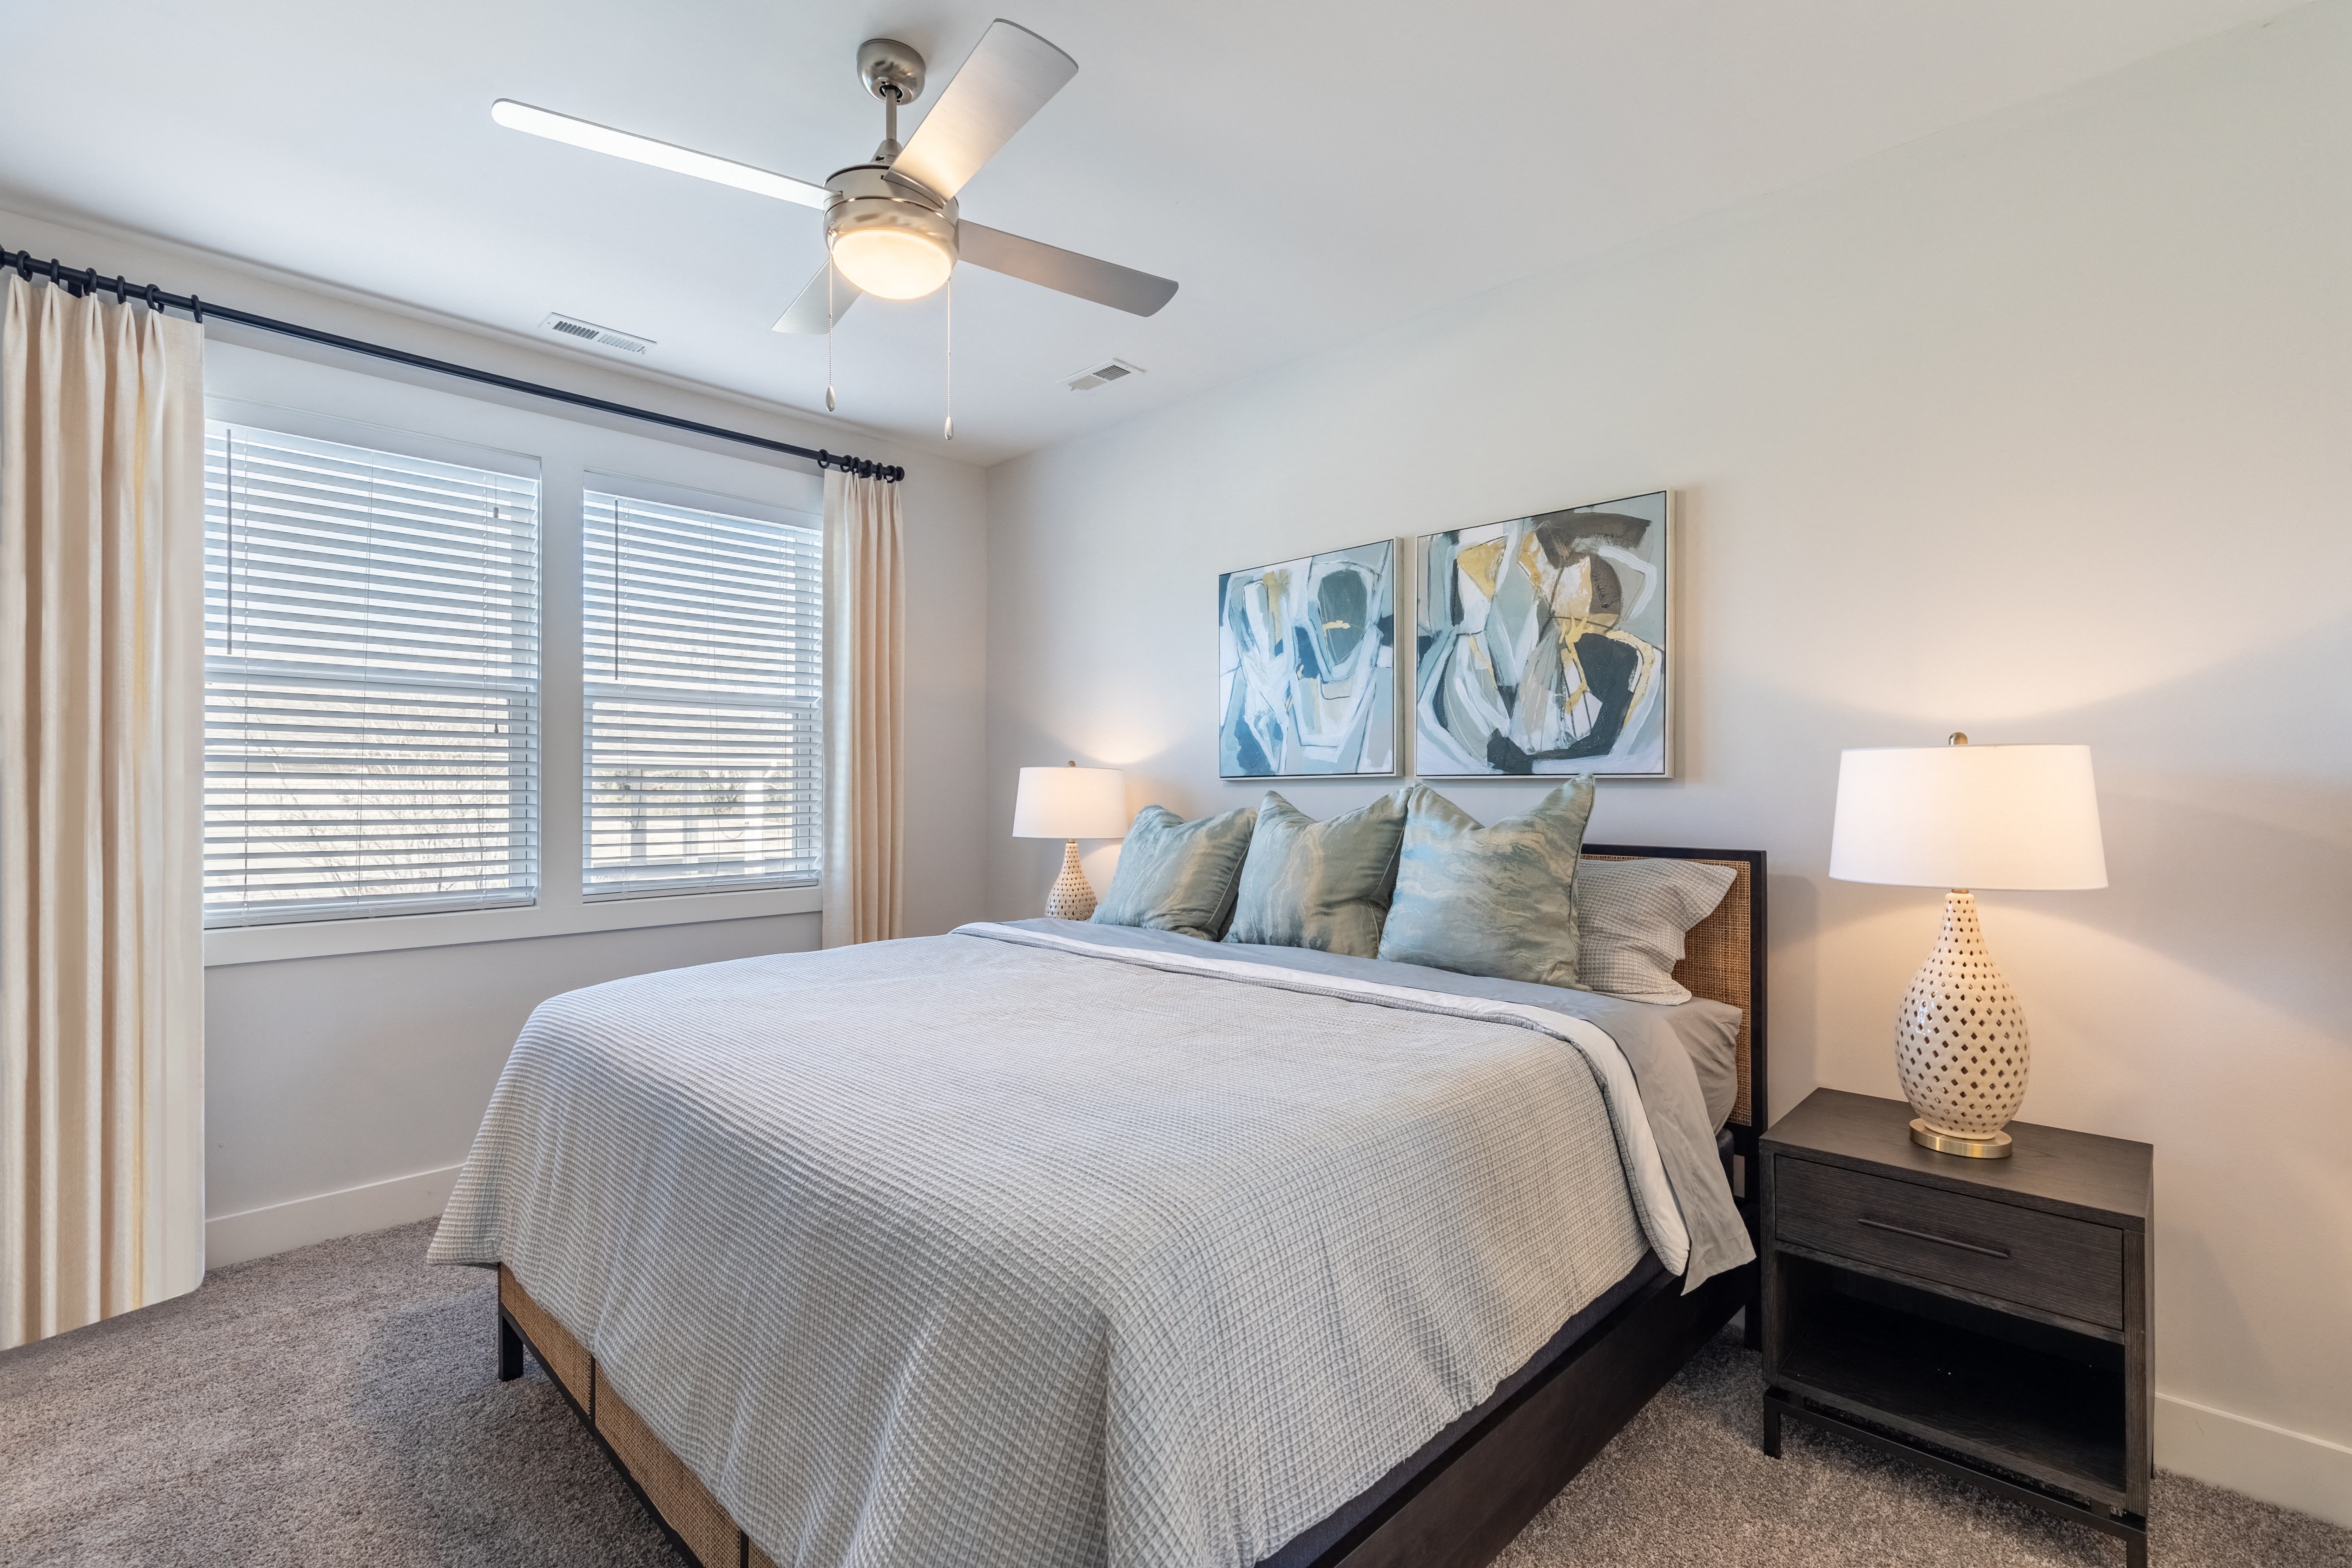 Luxury Three Bedroom Townhomes in Wilmington NC - Myrtle Landing - Bedroom with Plush Carpeting and a Ceiling Fan